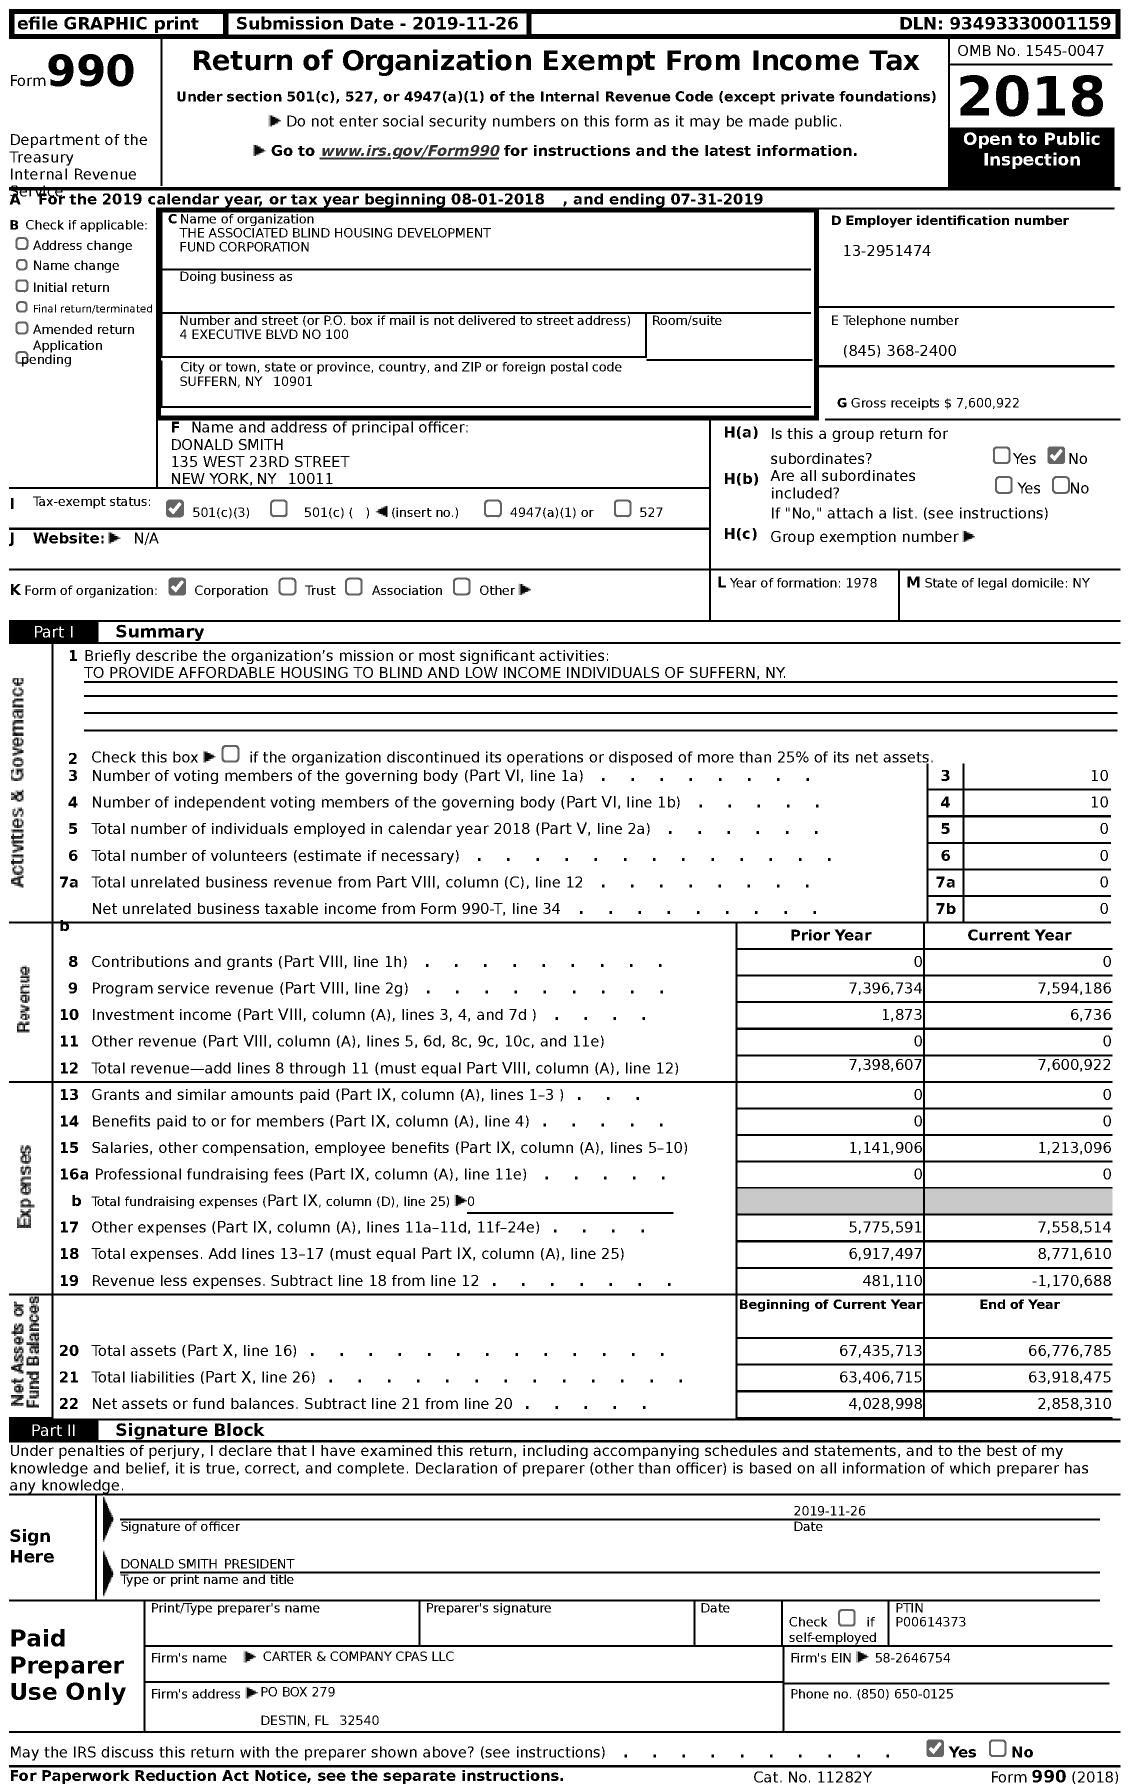 Image of first page of 2018 Form 990 for The Associated Blind Housing Development Fund Corporation